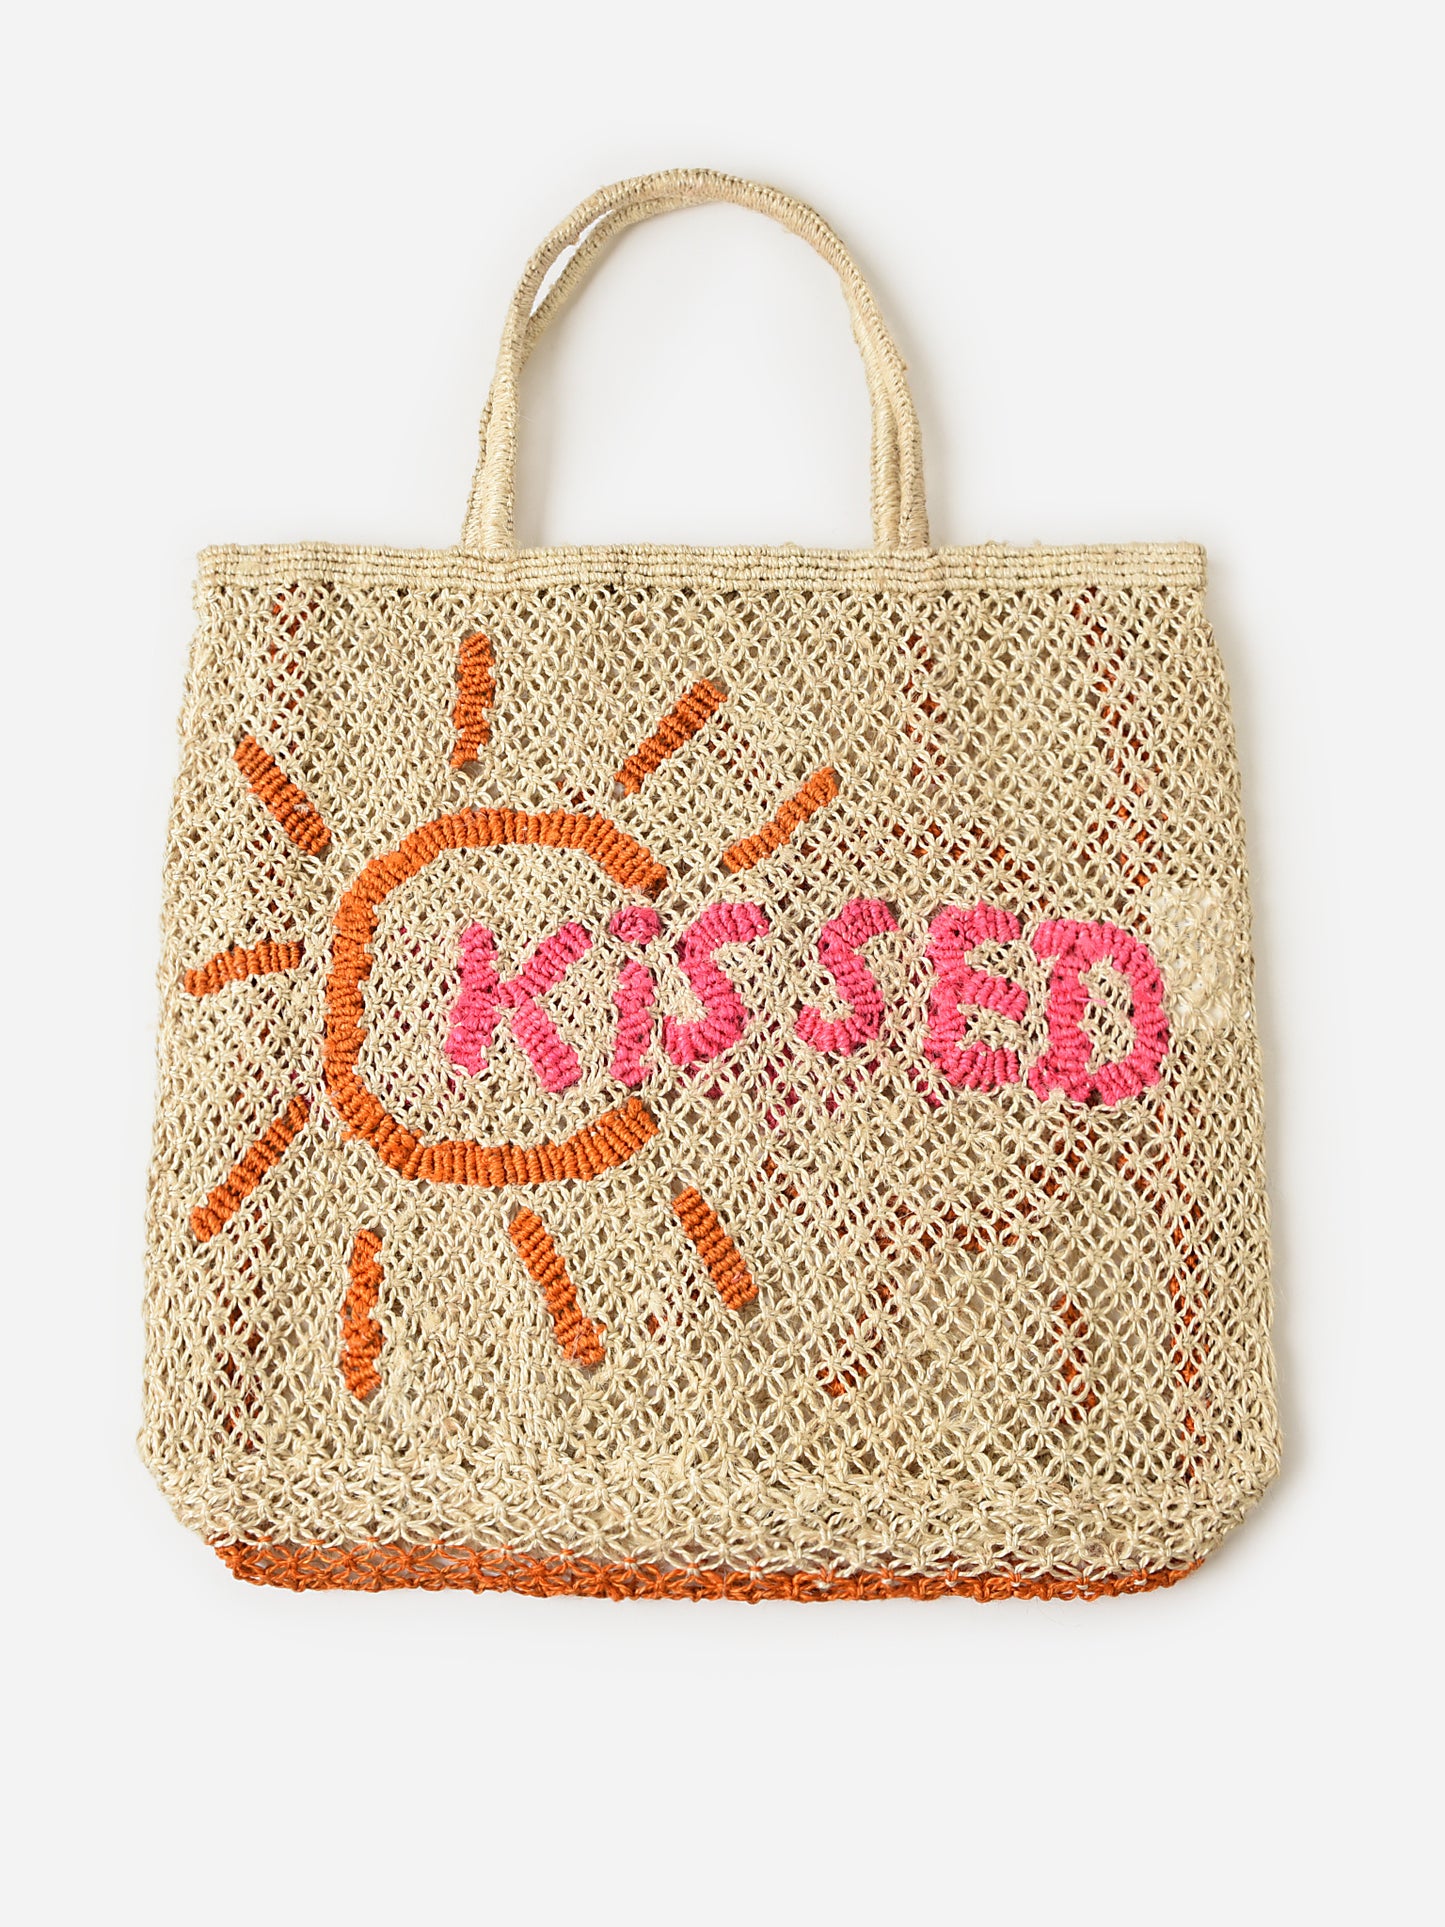 The Jacksons Sun Kissed Tote